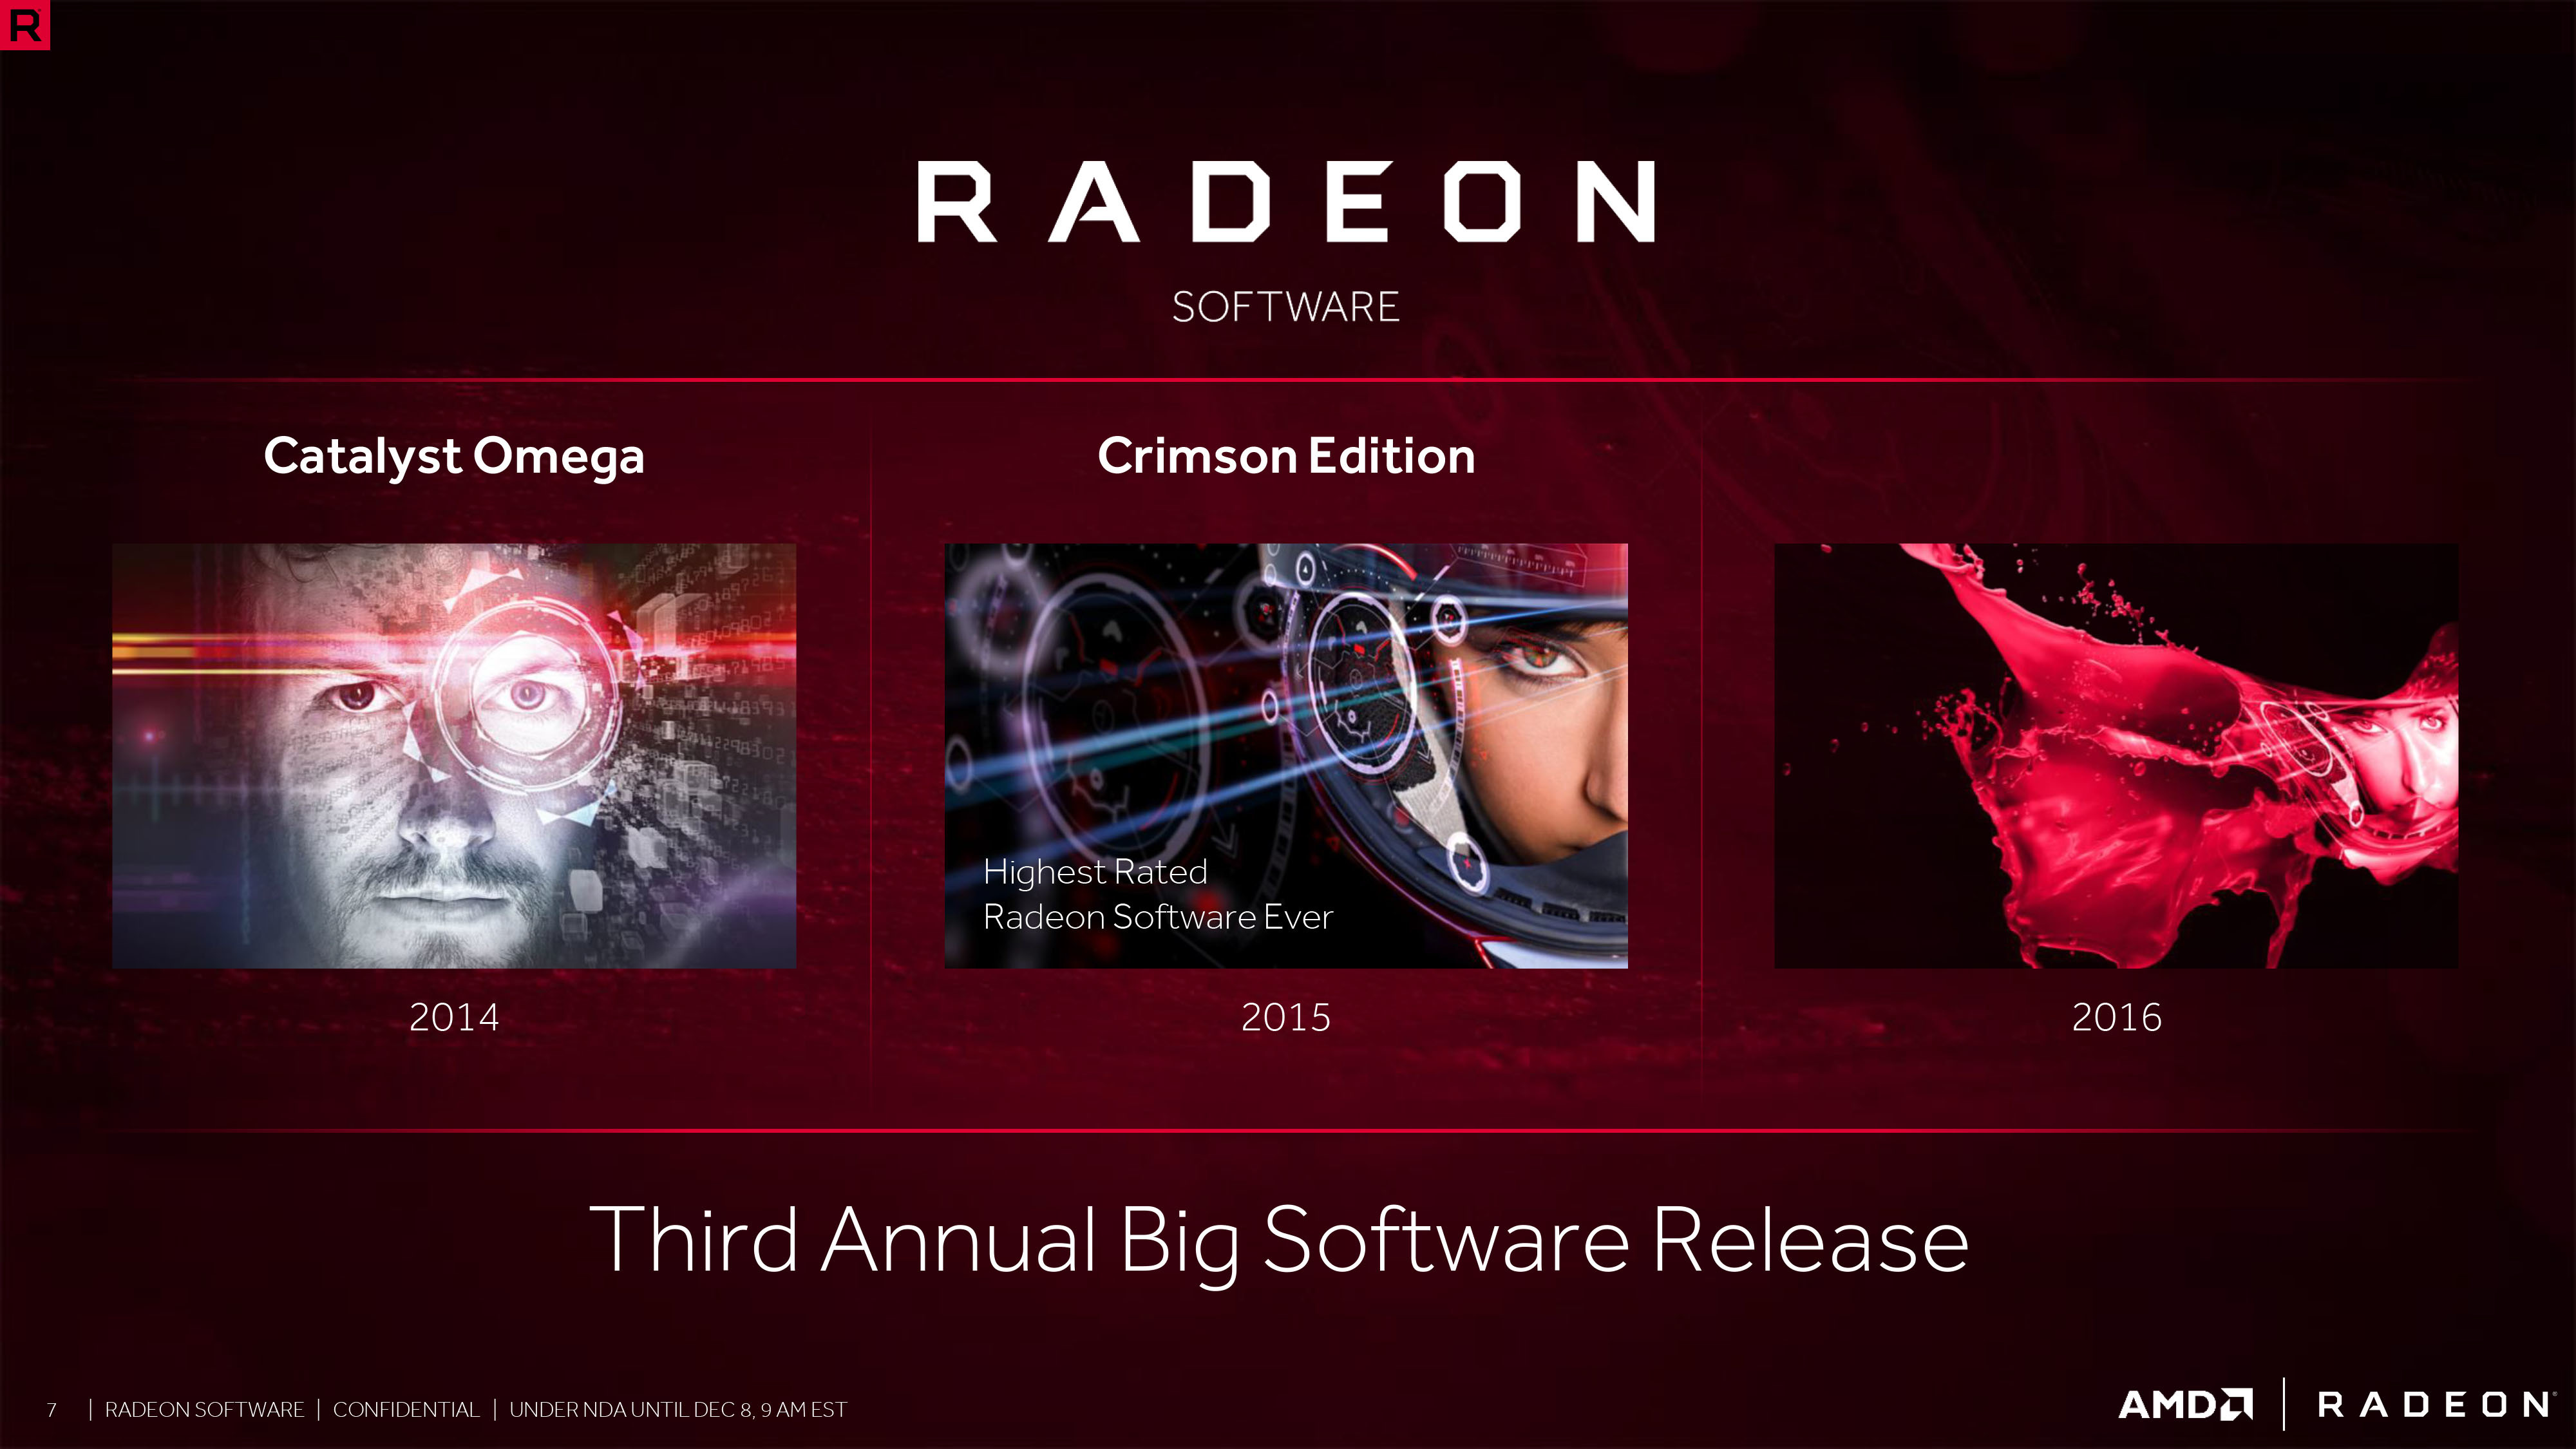 Media asset in full size related to 3dfxzone.it news item entitled as follows: AMD rilascia il driver Radeon Software Crimson ReLive Edition 16.12.1 | Image Name: news25407_AMD-Radeon-Software-Crimson-ReLive-Edition_2.jpg